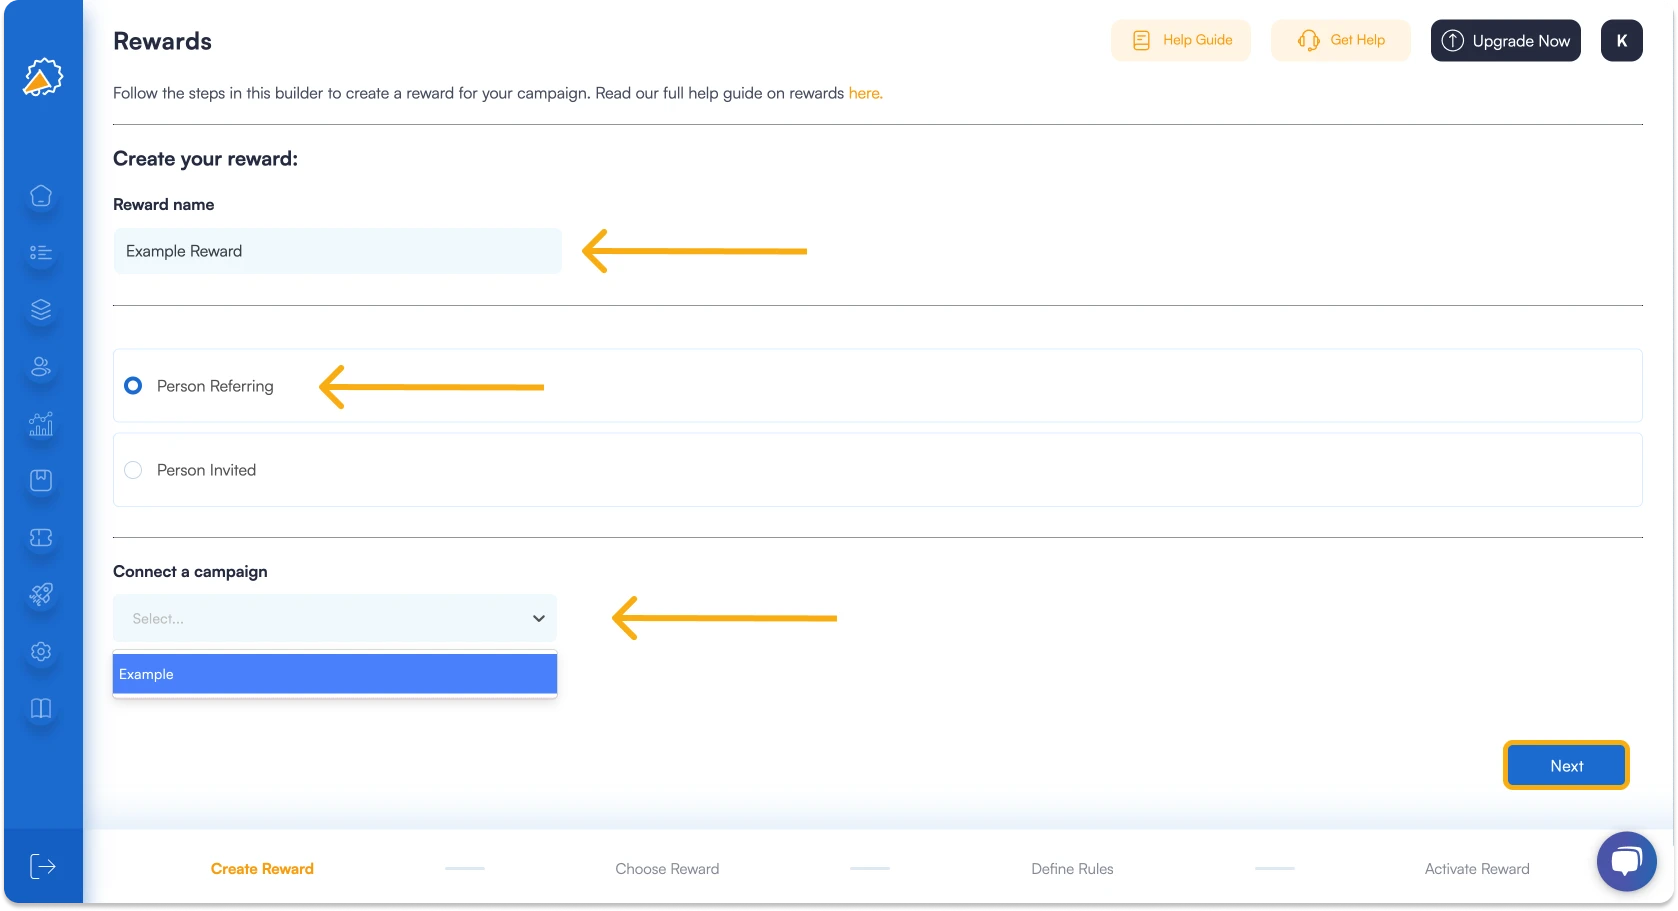 Screenshot showing that you can add  a Webhook Reward in Referral Factory. 